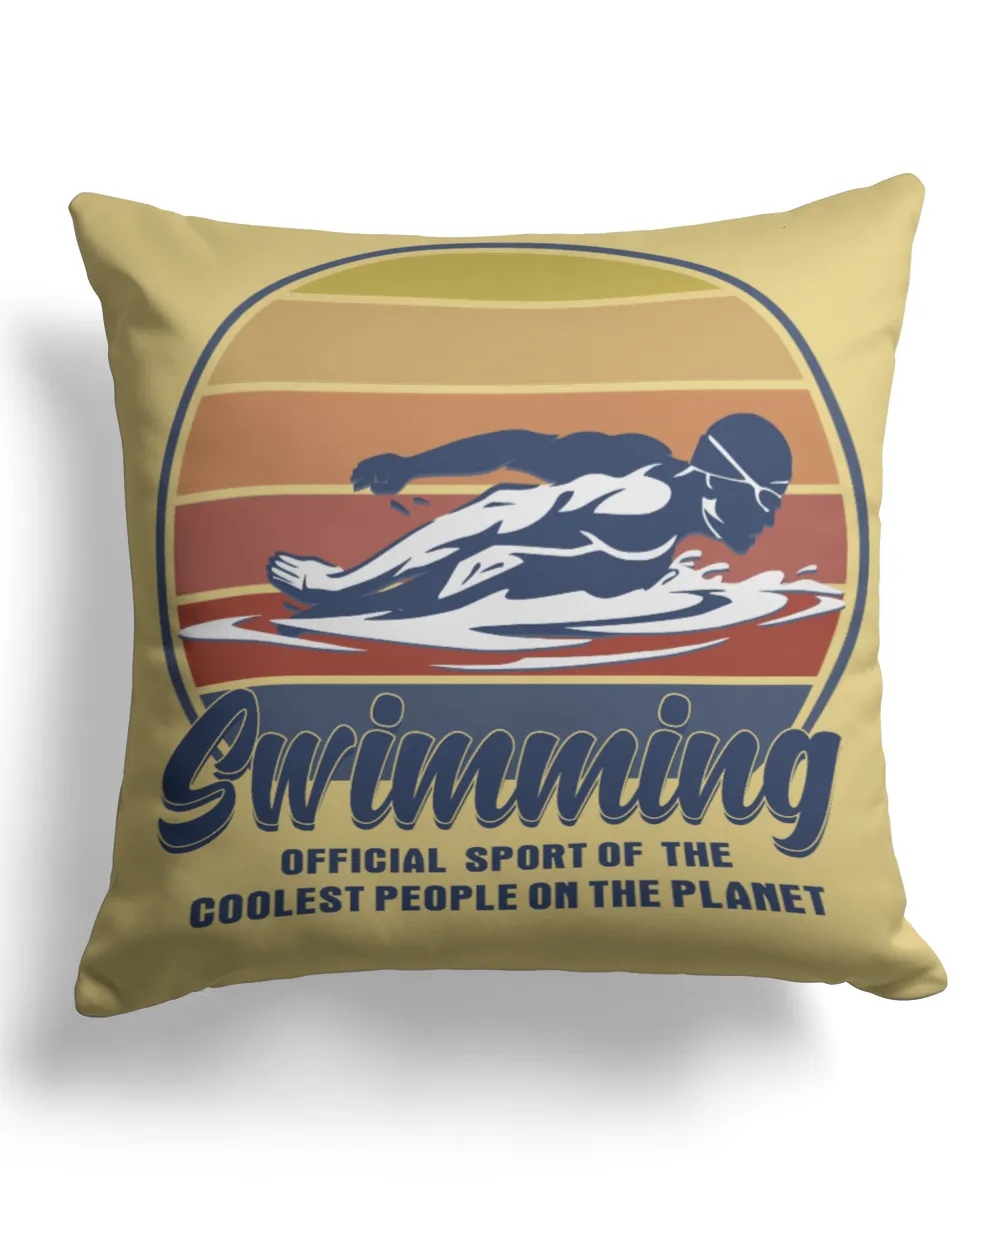 Swimming official sport of the coolest people